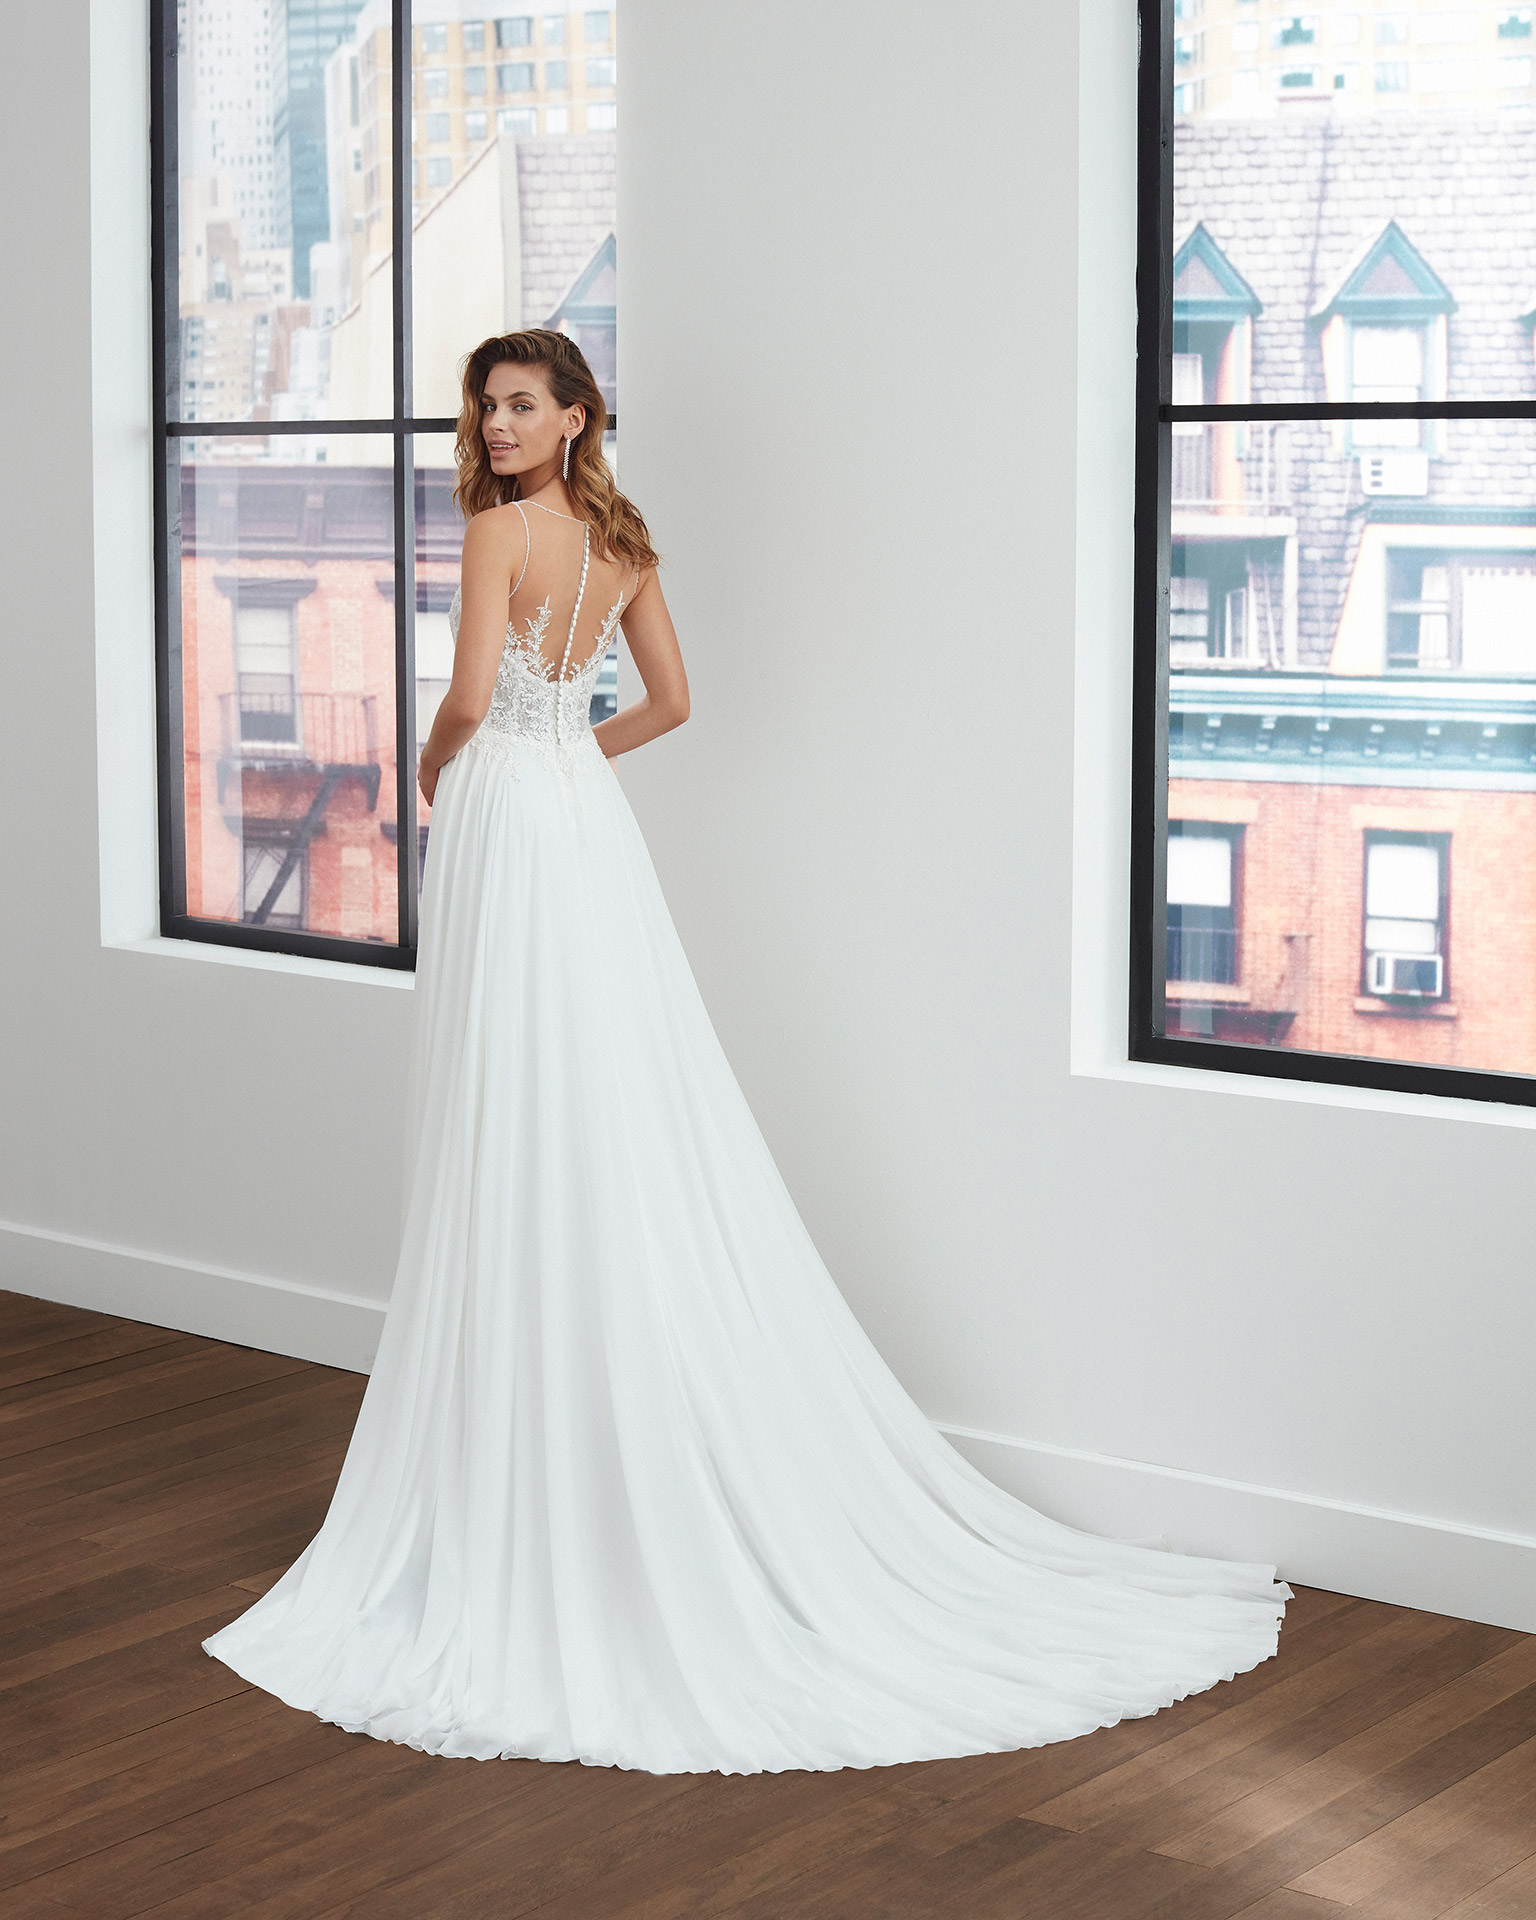 Peau d'ange voile wedding dress with pleats at the waist, deep-plunge neckline and back with sheer inserts. 2020  Collection.